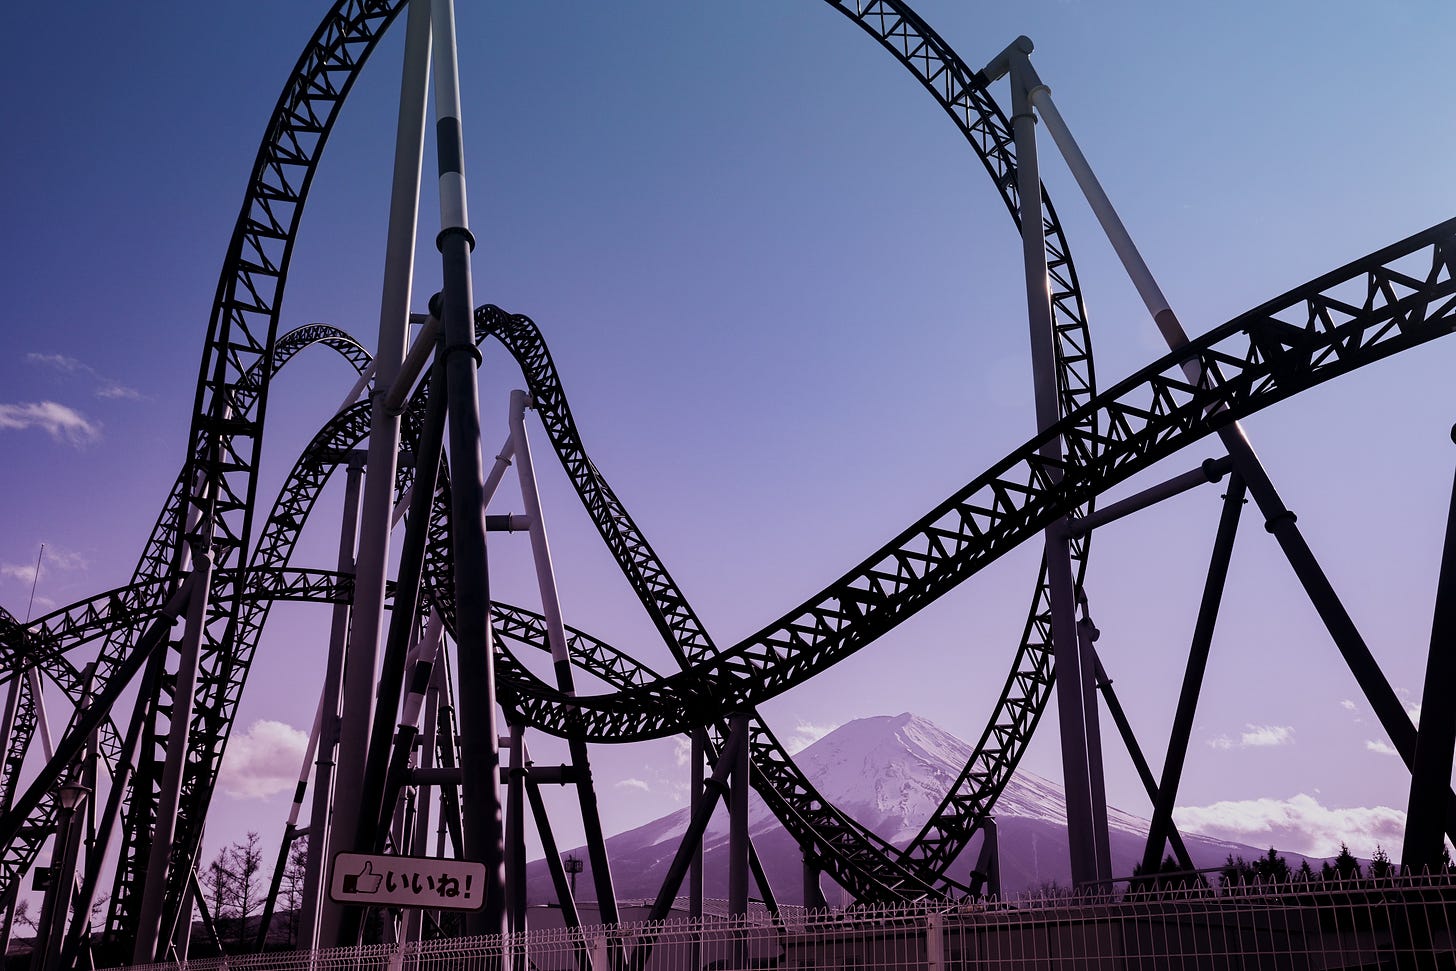 Large roller coaster track against a blue and purple sky with mountains in the distance.